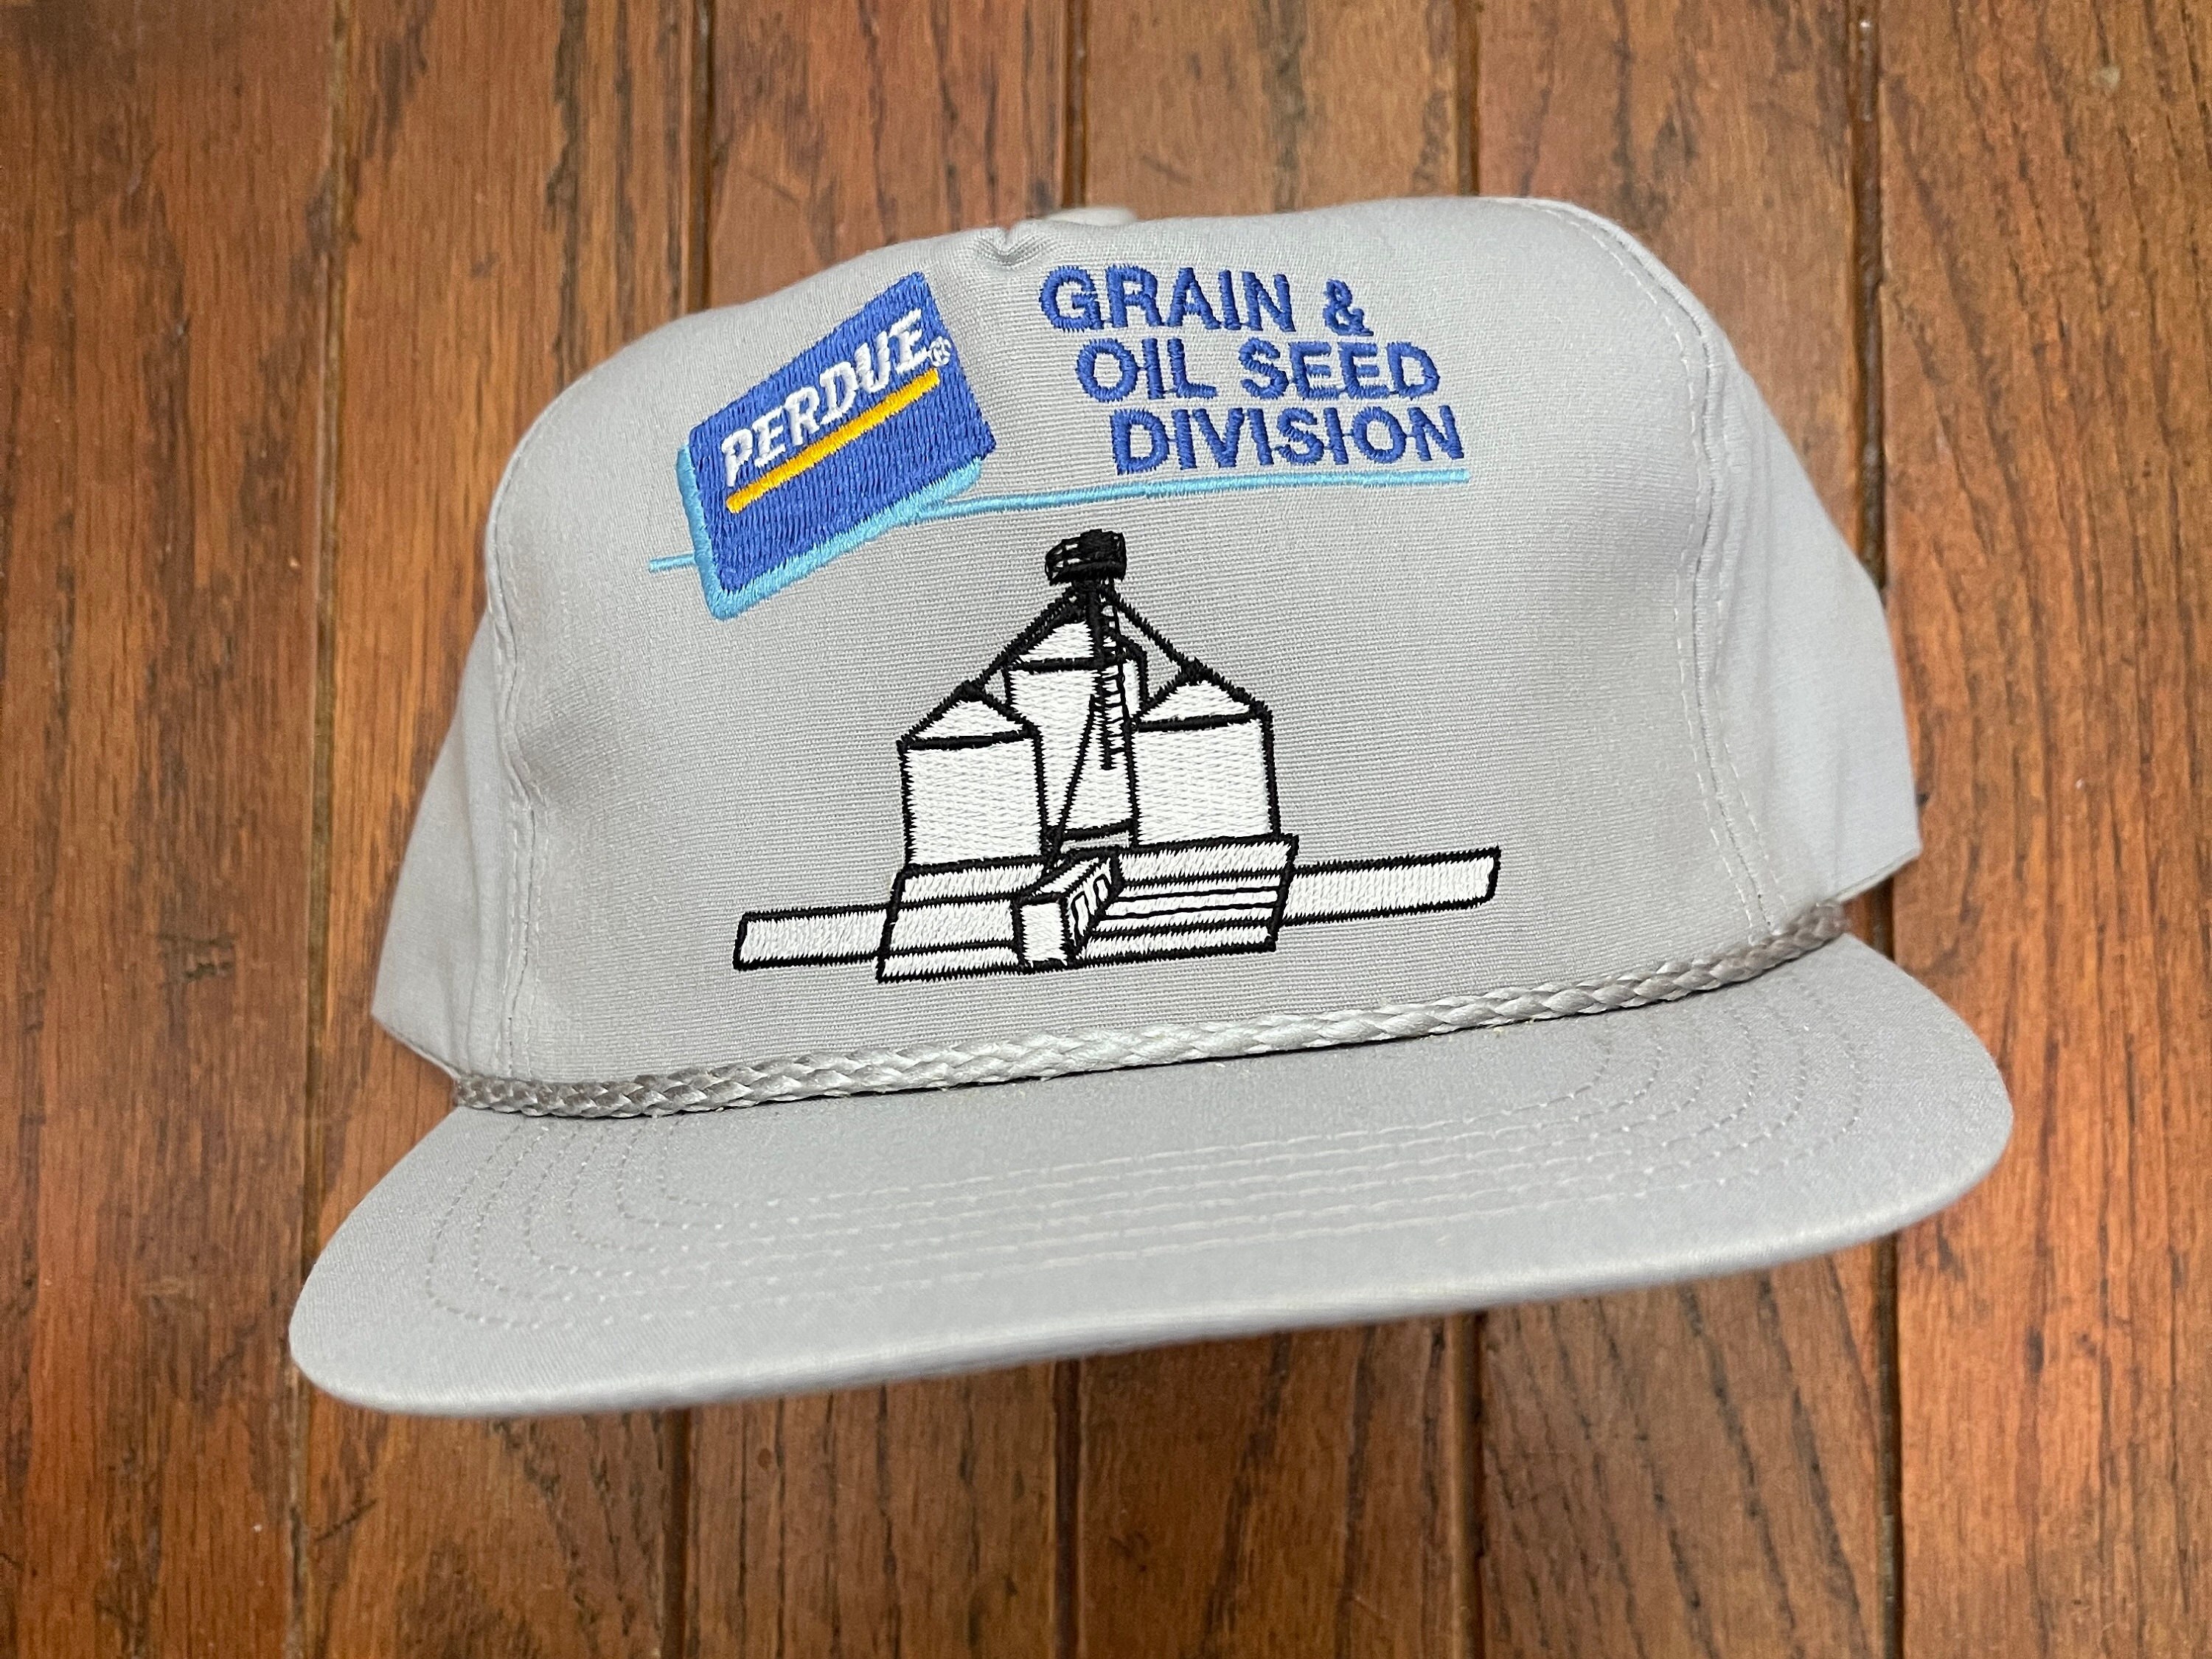 Vintage Trucker Hat Snapback Baseball Cap Pioneer Seed Corn Clunette Grain Elevator Indiana Farming Agriculture K Brand Products Made In USA